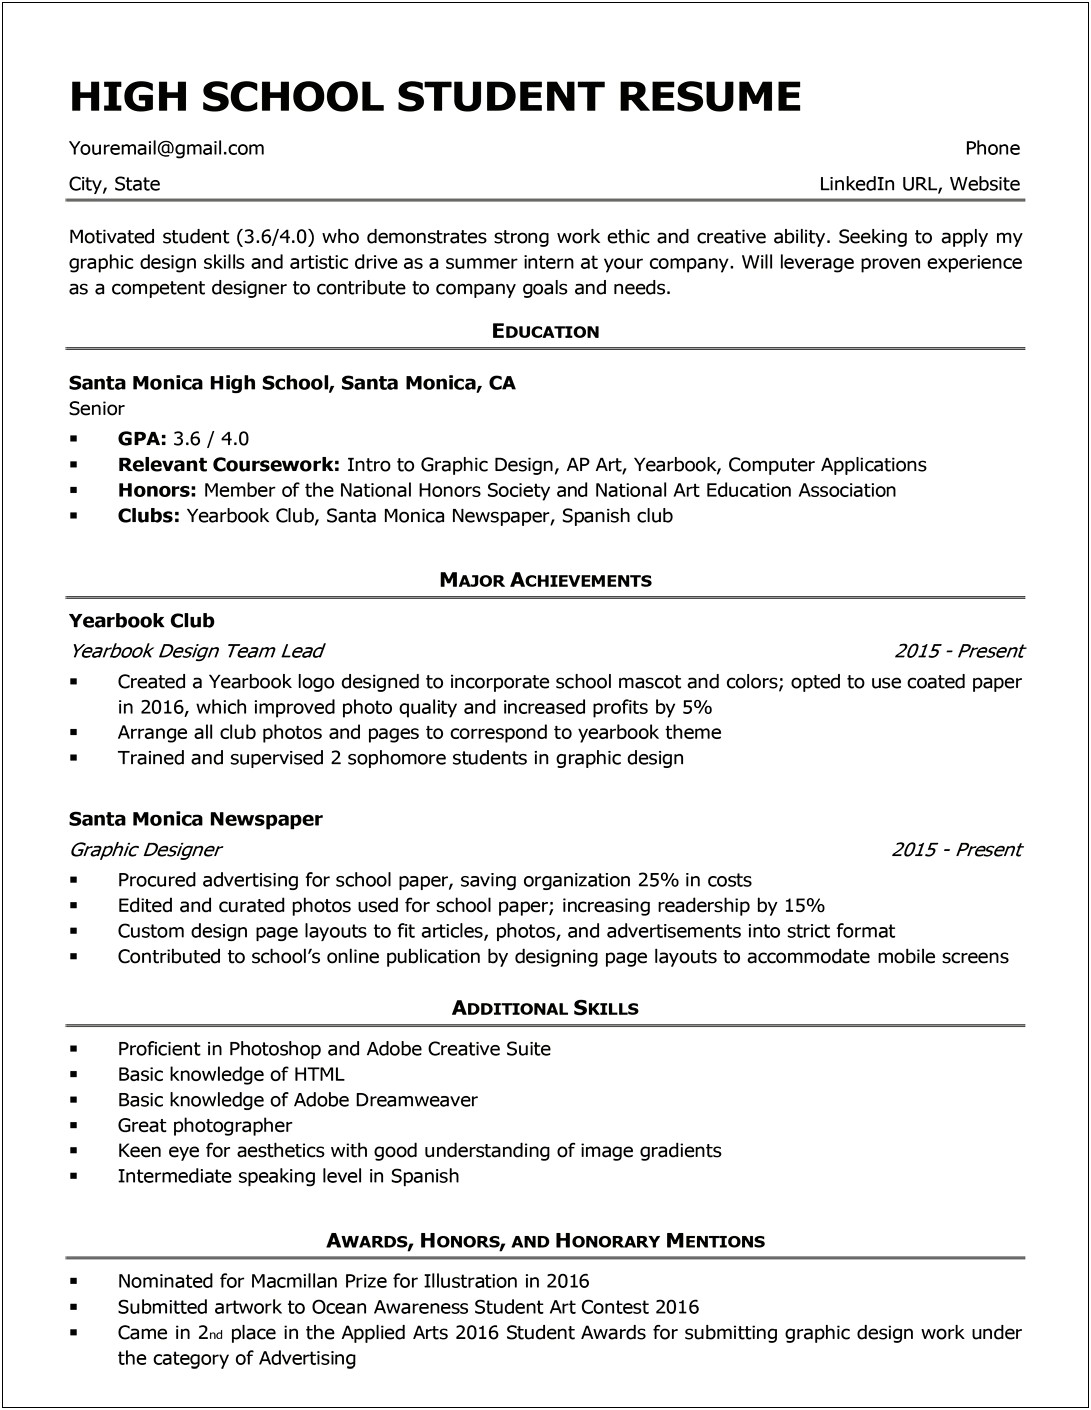 Resume Or Cv For High School Student